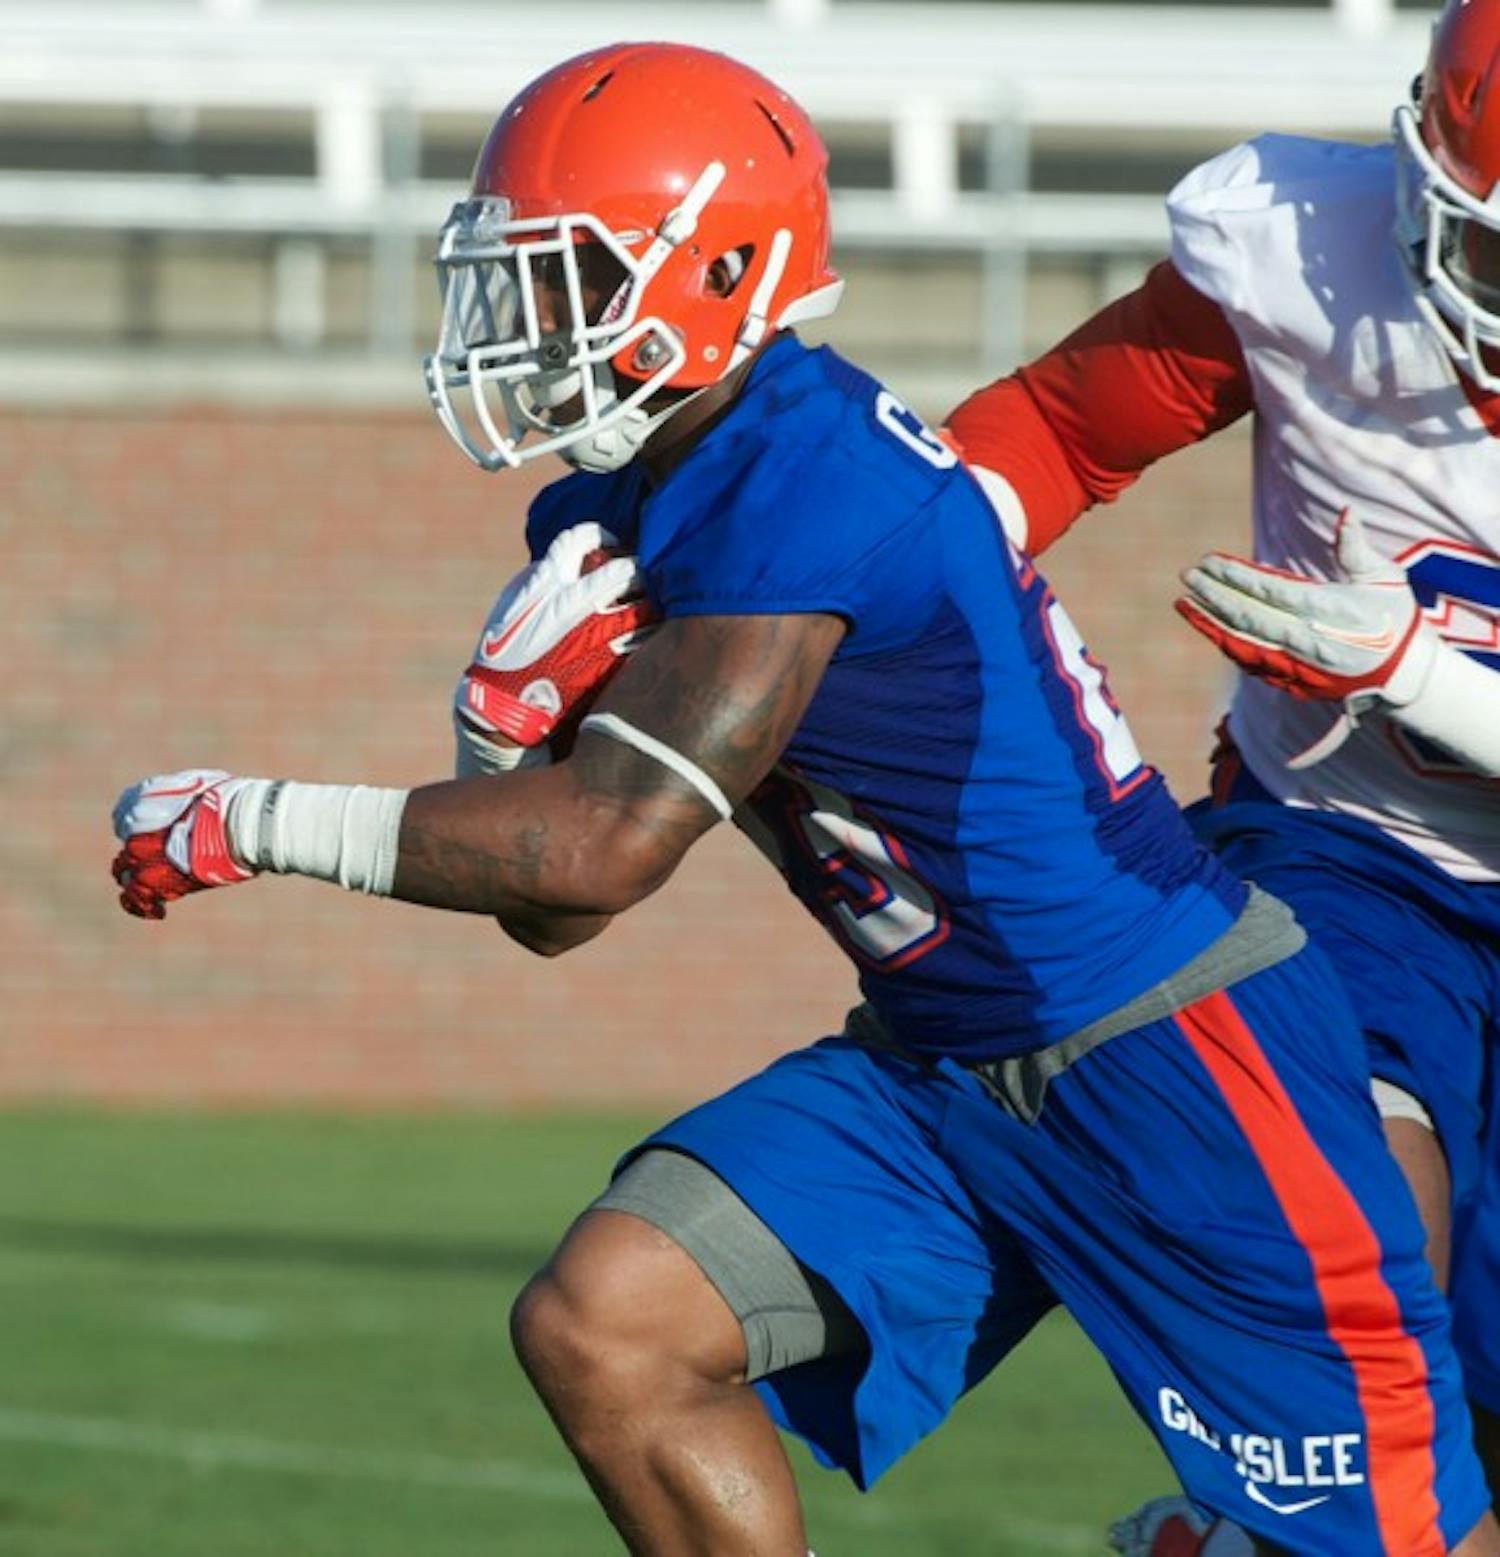 Senior running back Mike Gillislee runs the football during the Gators' first practice of fall camp Aug. 3. Gillislee said that he wants to have a "banger" season in 2012.